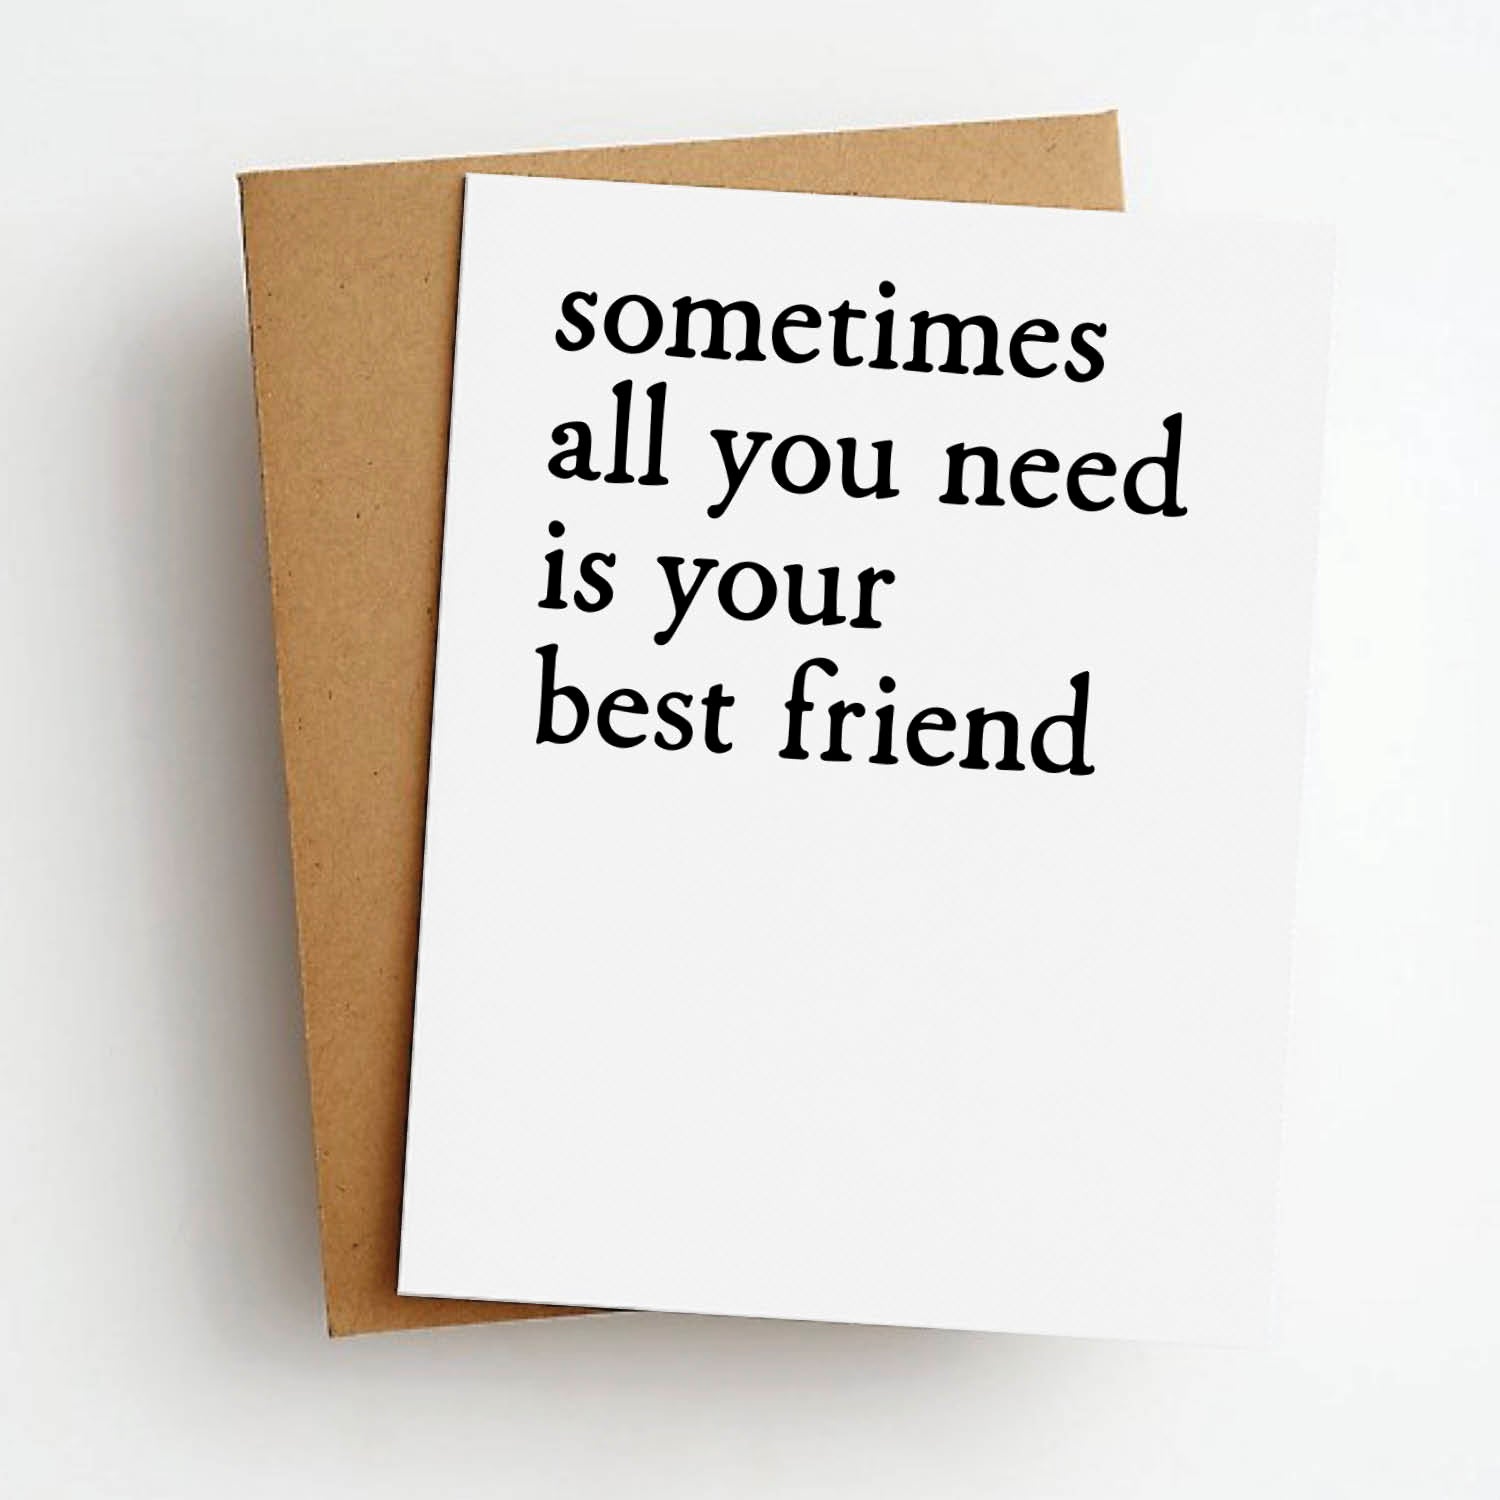 need your best friend